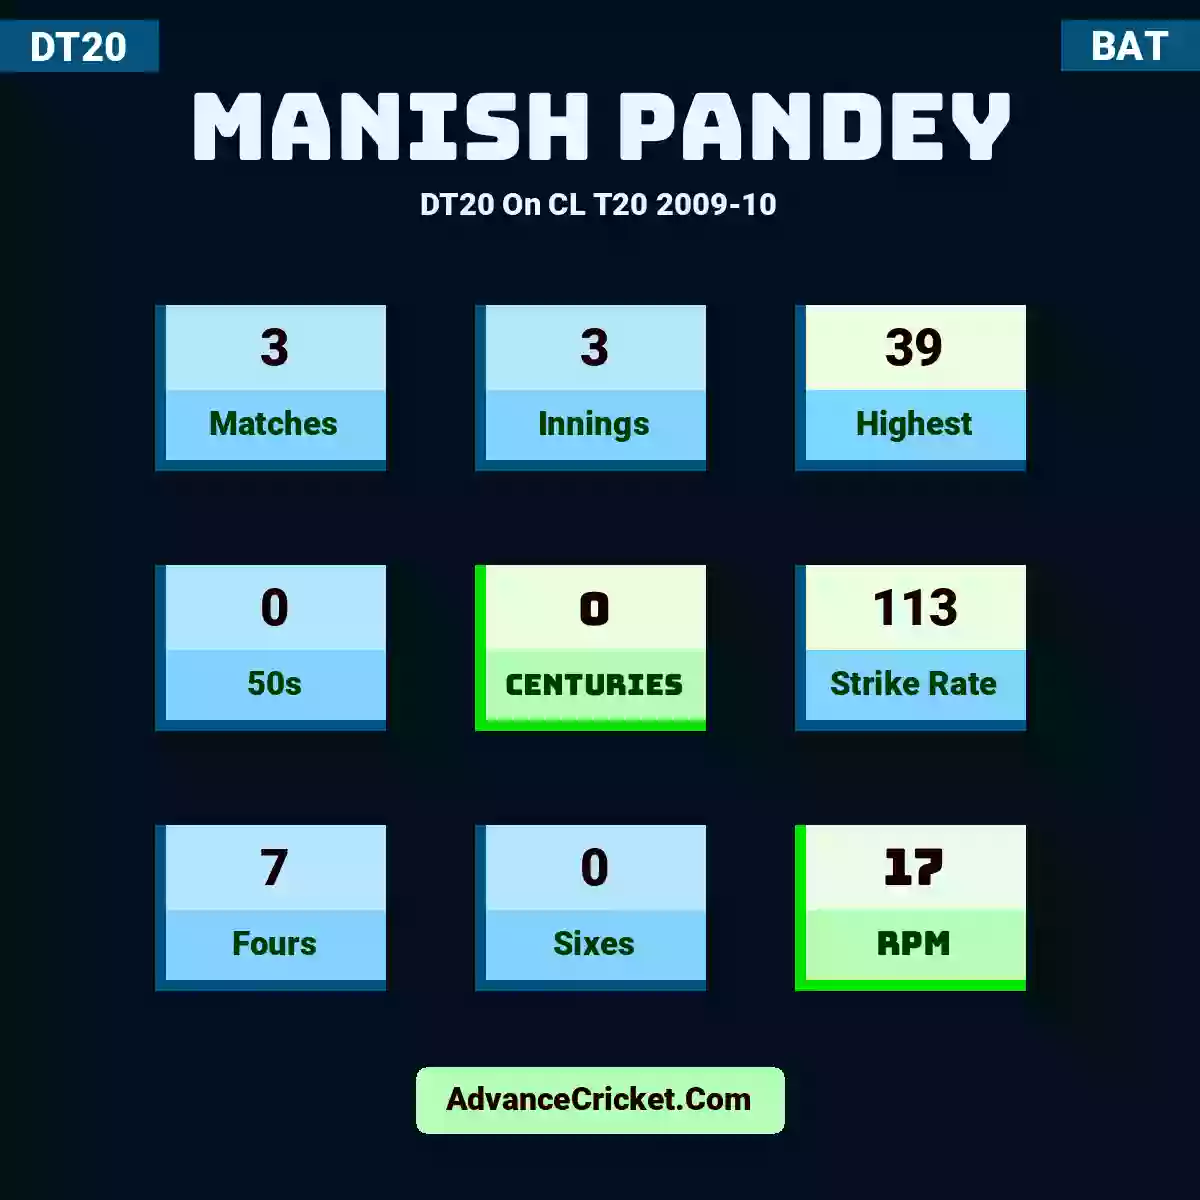 Manish Pandey DT20  On CL T20 2009-10, Manish Pandey played 3 matches, scored 39 runs as highest, 0 half-centuries, and 0 centuries, with a strike rate of 113. M.Pandey hit 7 fours and 0 sixes, with an RPM of 17.